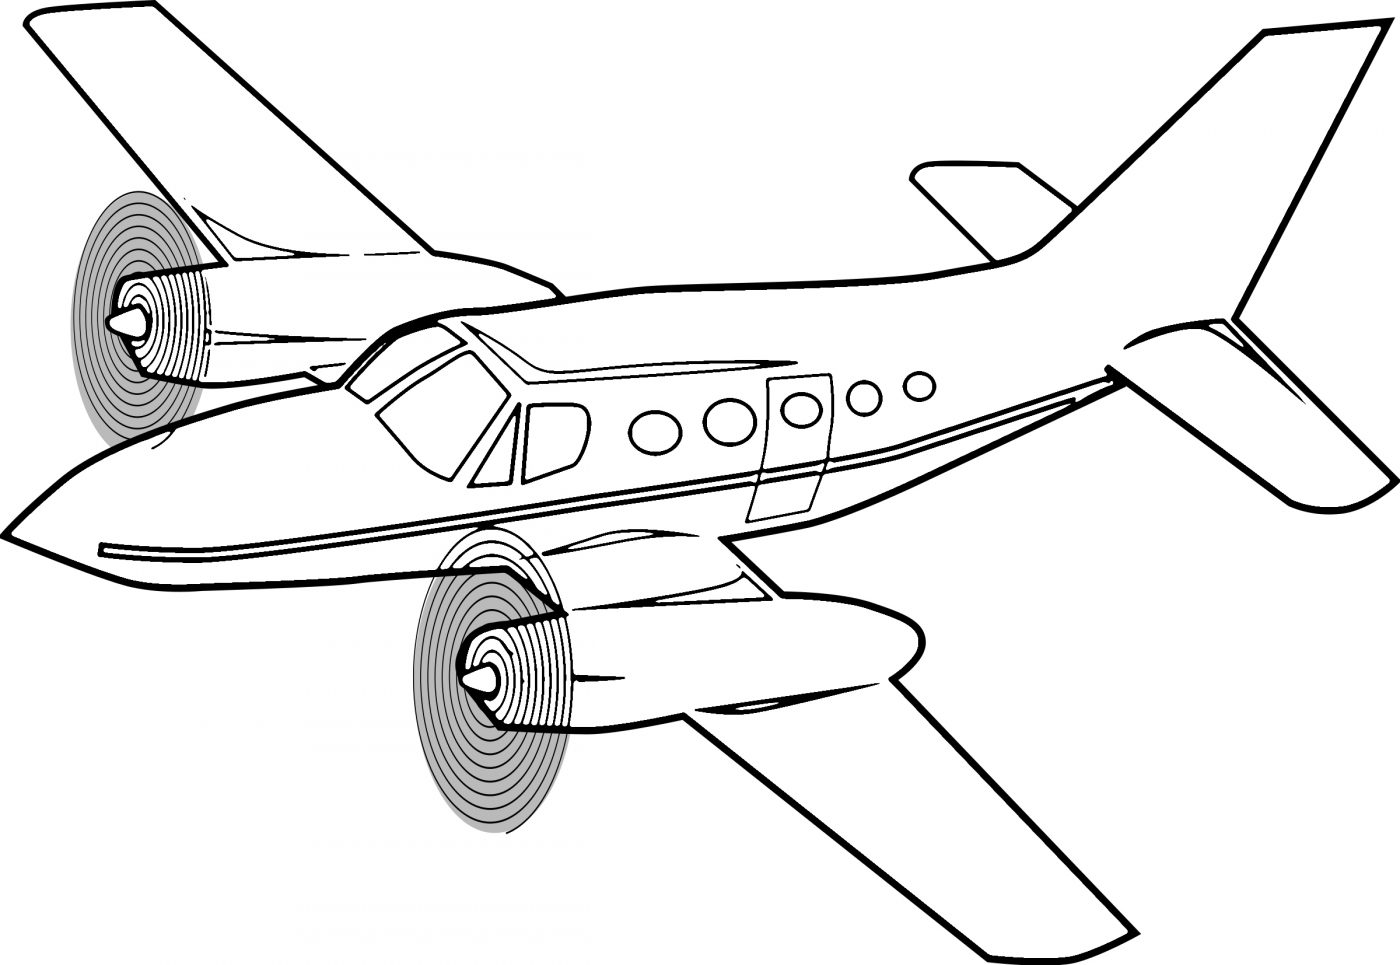 Printable Lego Airplane Pictures To Color